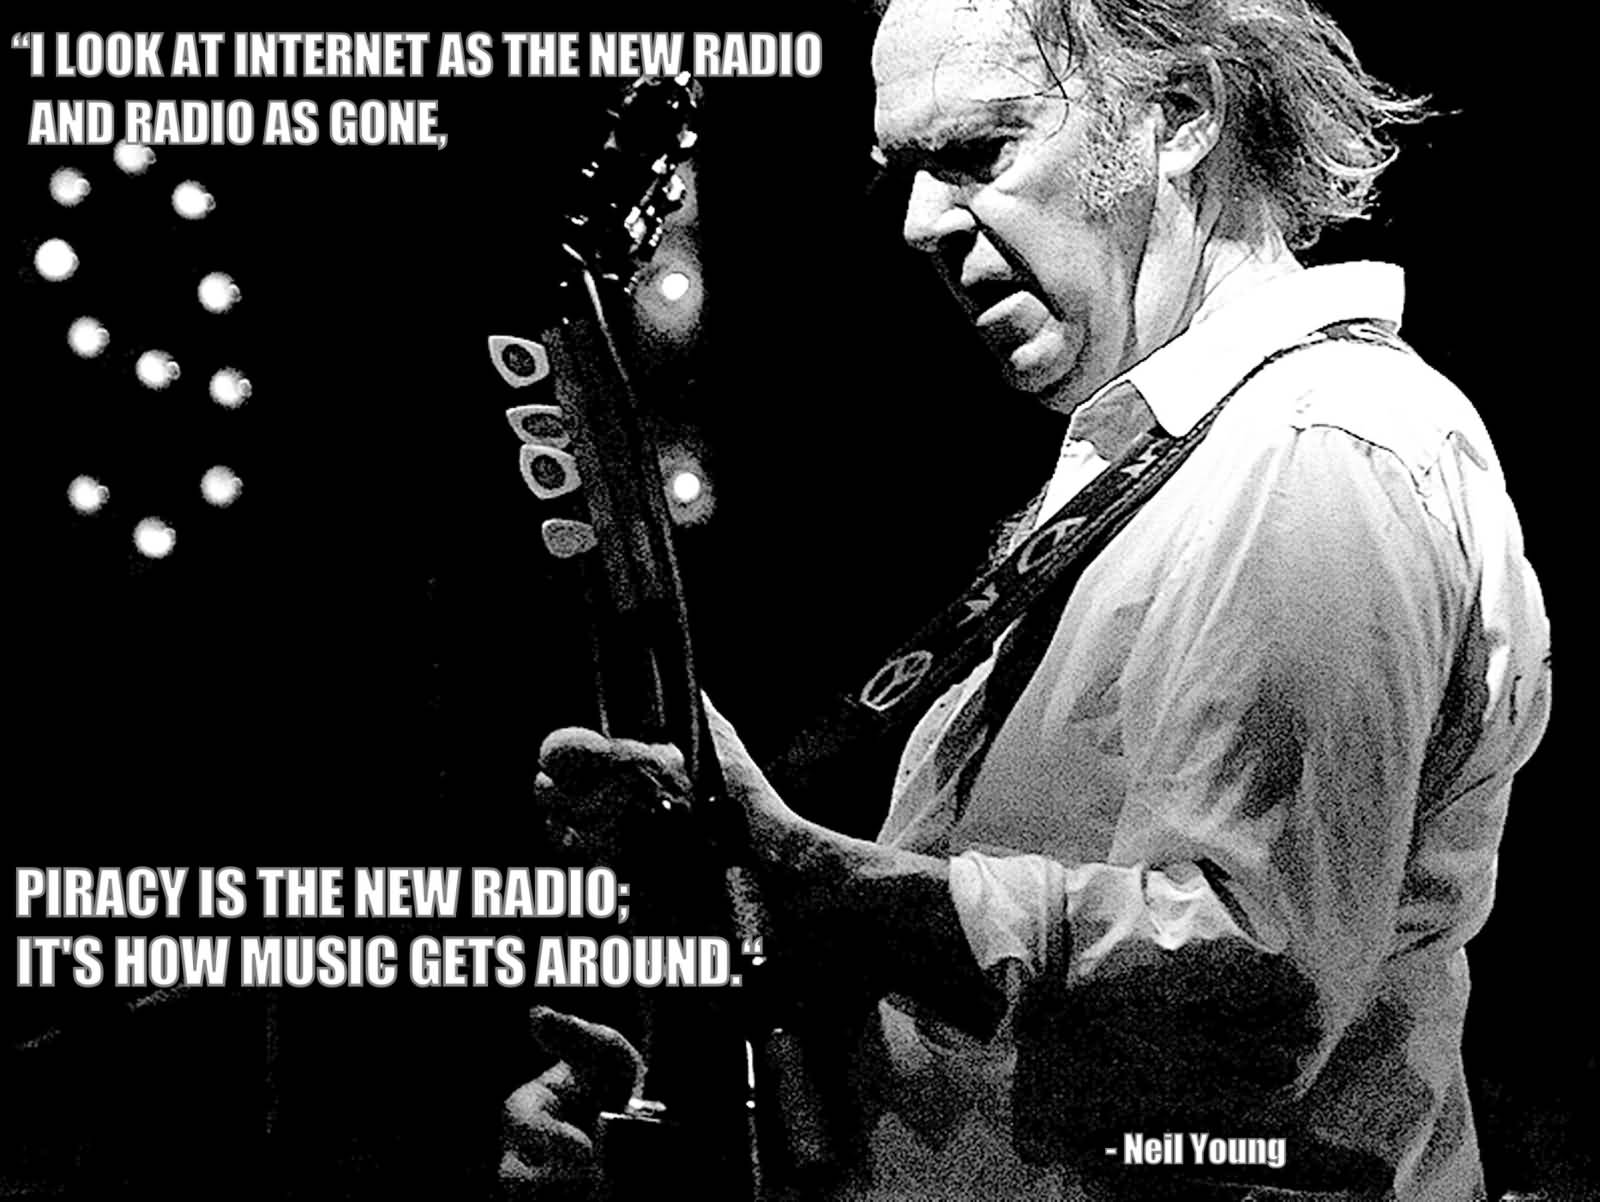 I look at internet as the new radio and radio as gone piracy is the new radio it's how.. Neil Young